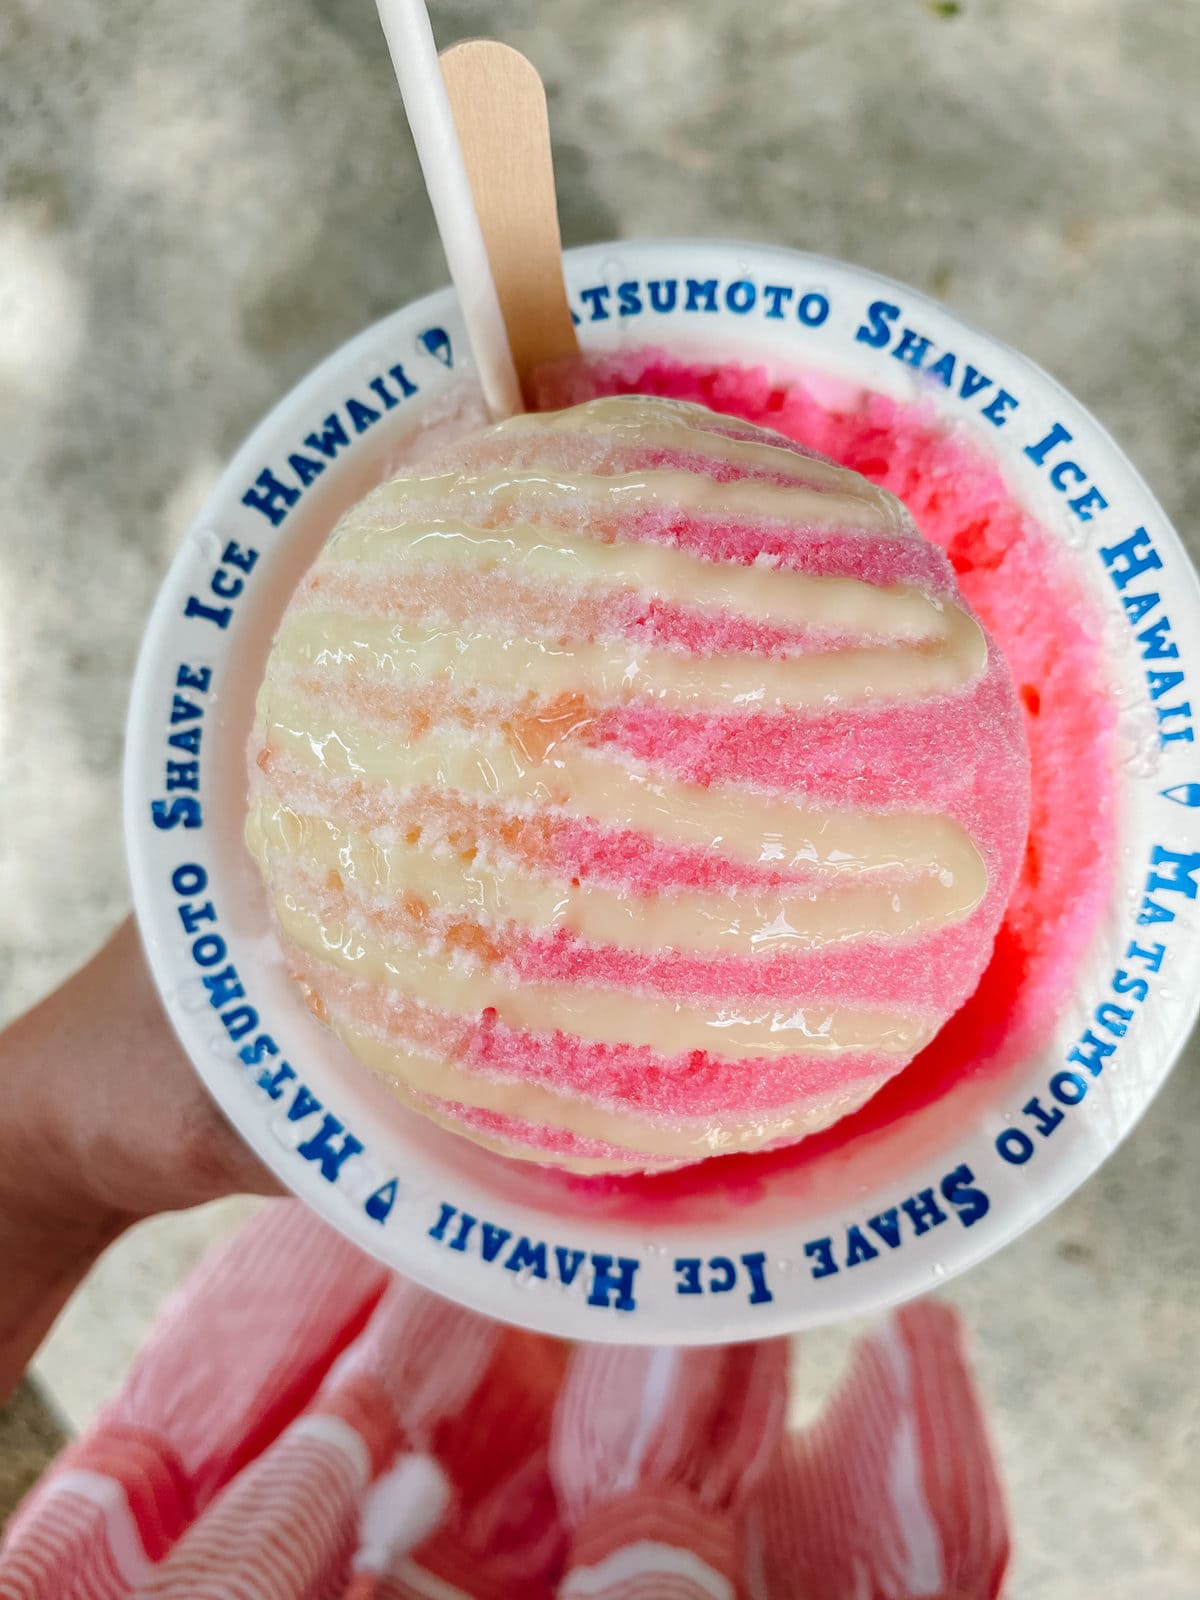 Oahu shave ice